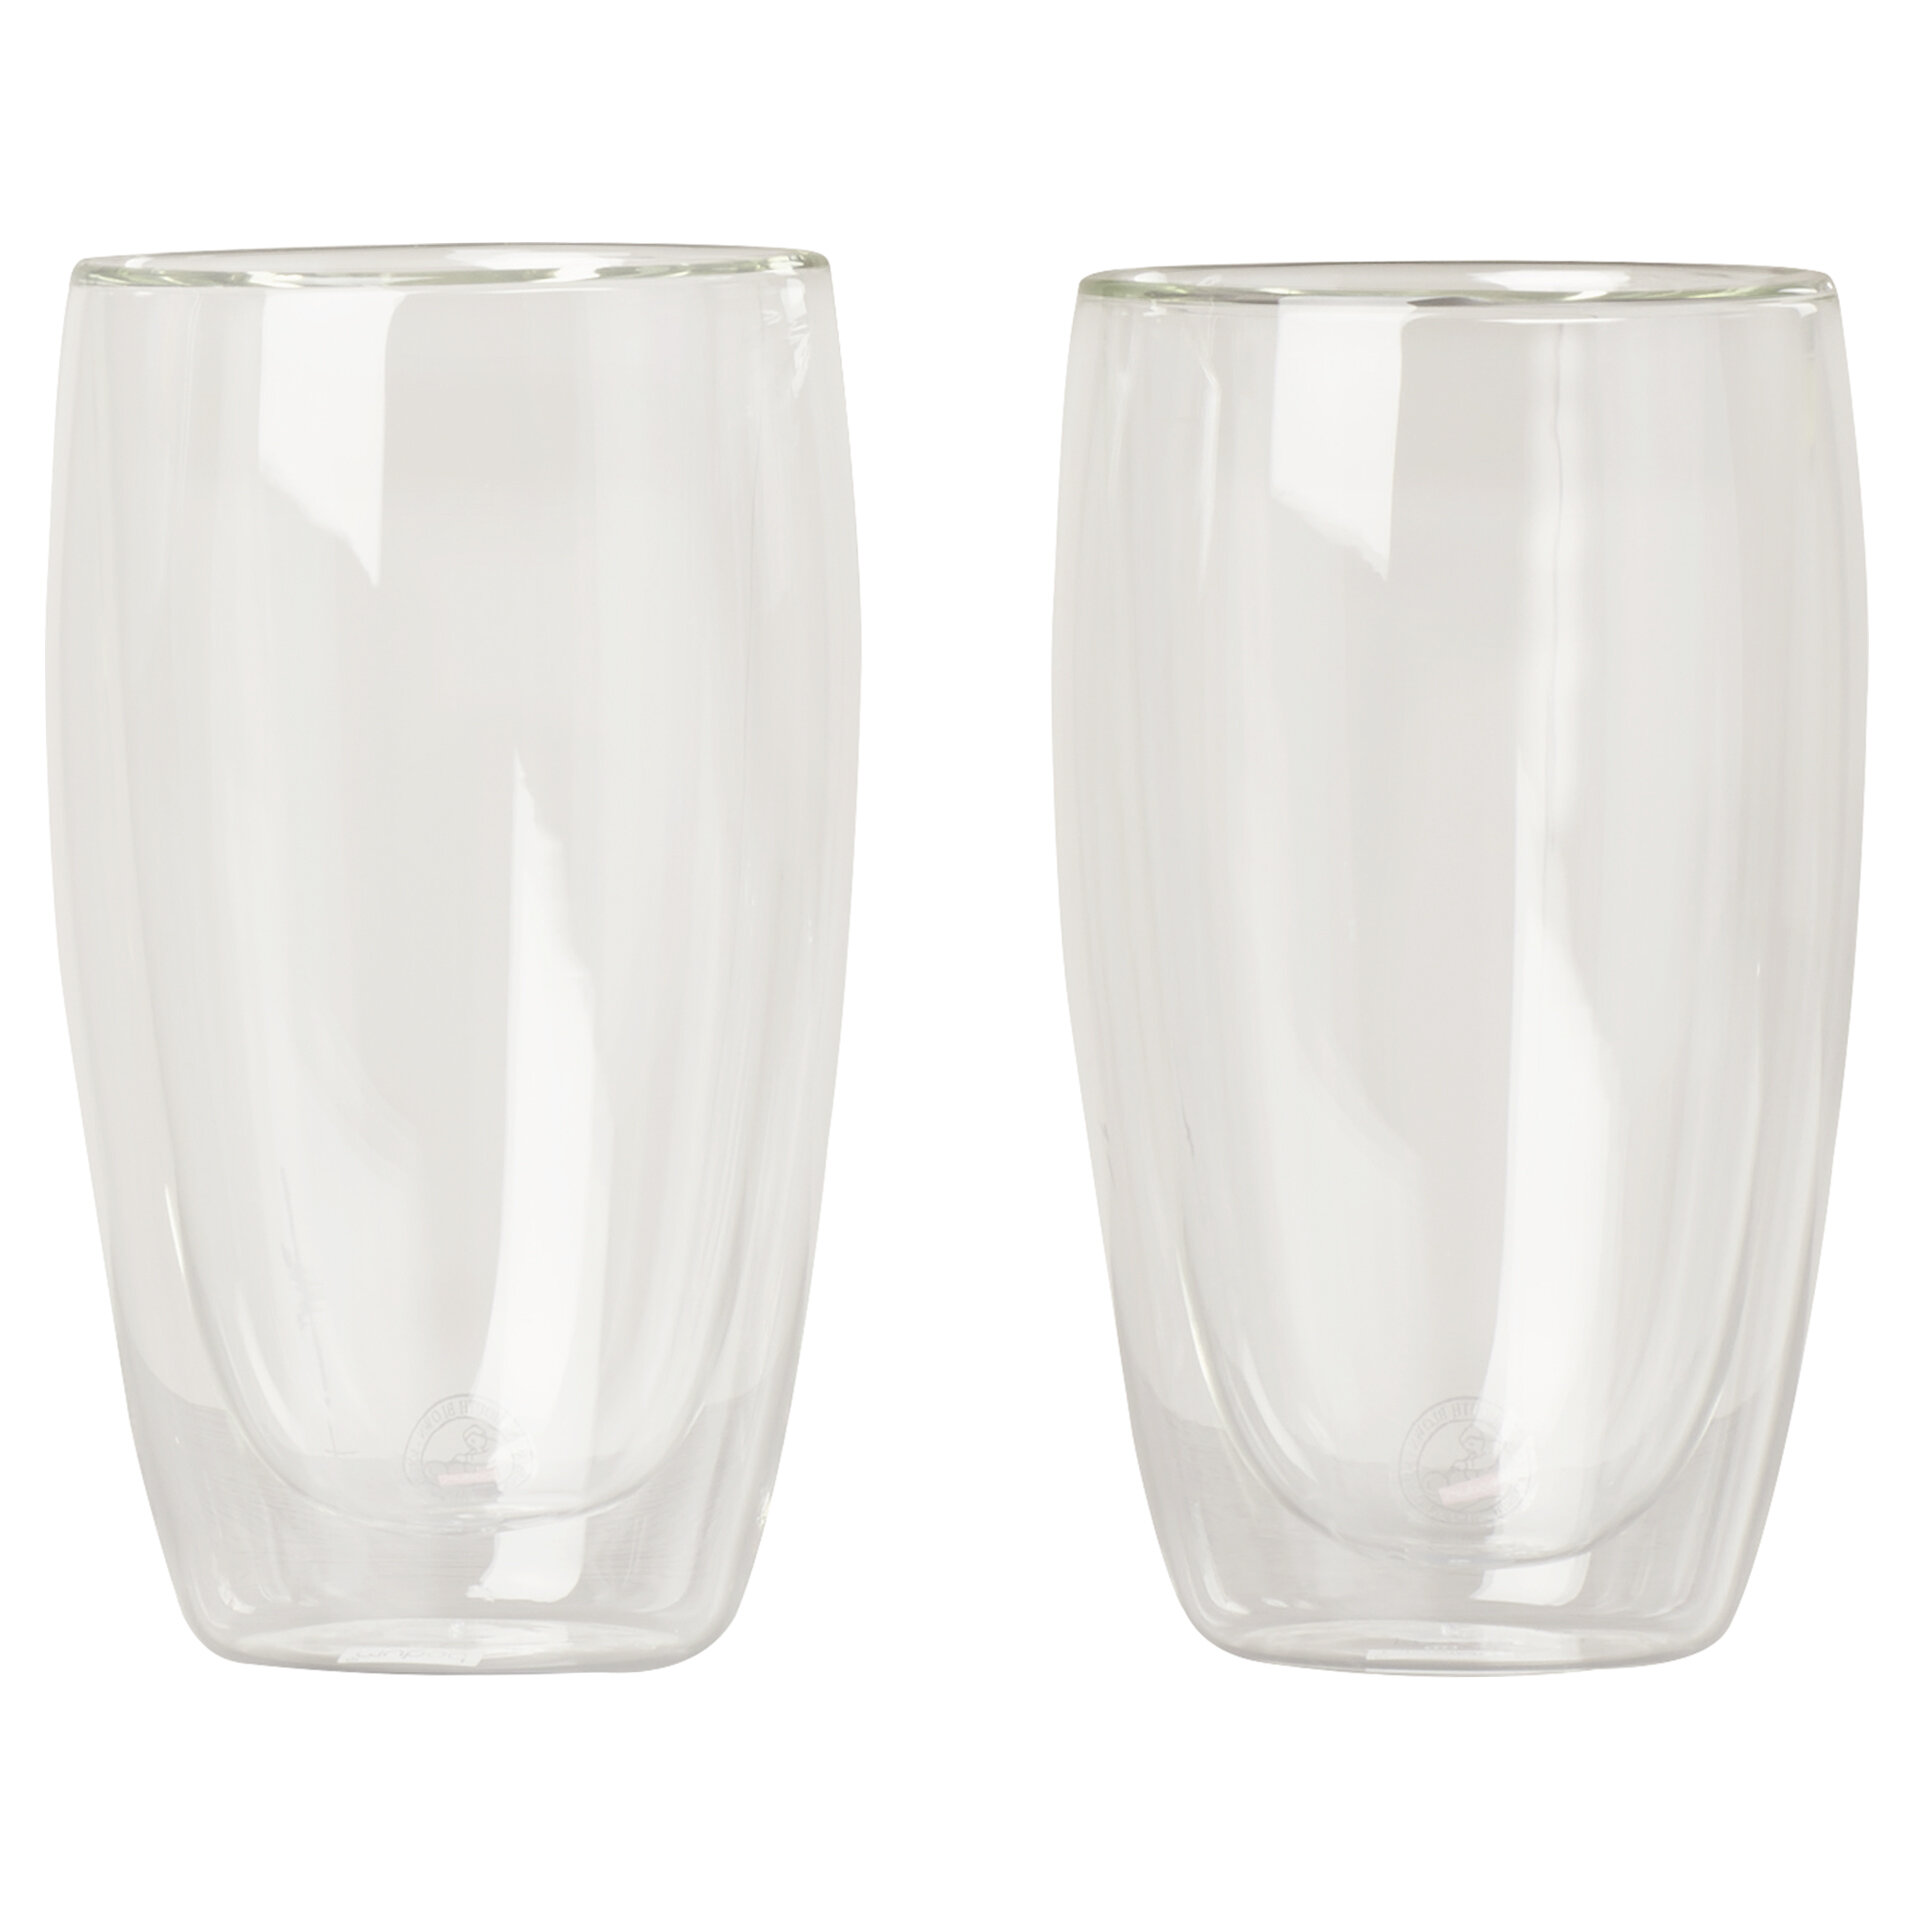 Bodum Pavina Double Wall Thermo-Glasses (Set of 2) - Browns Kitchen